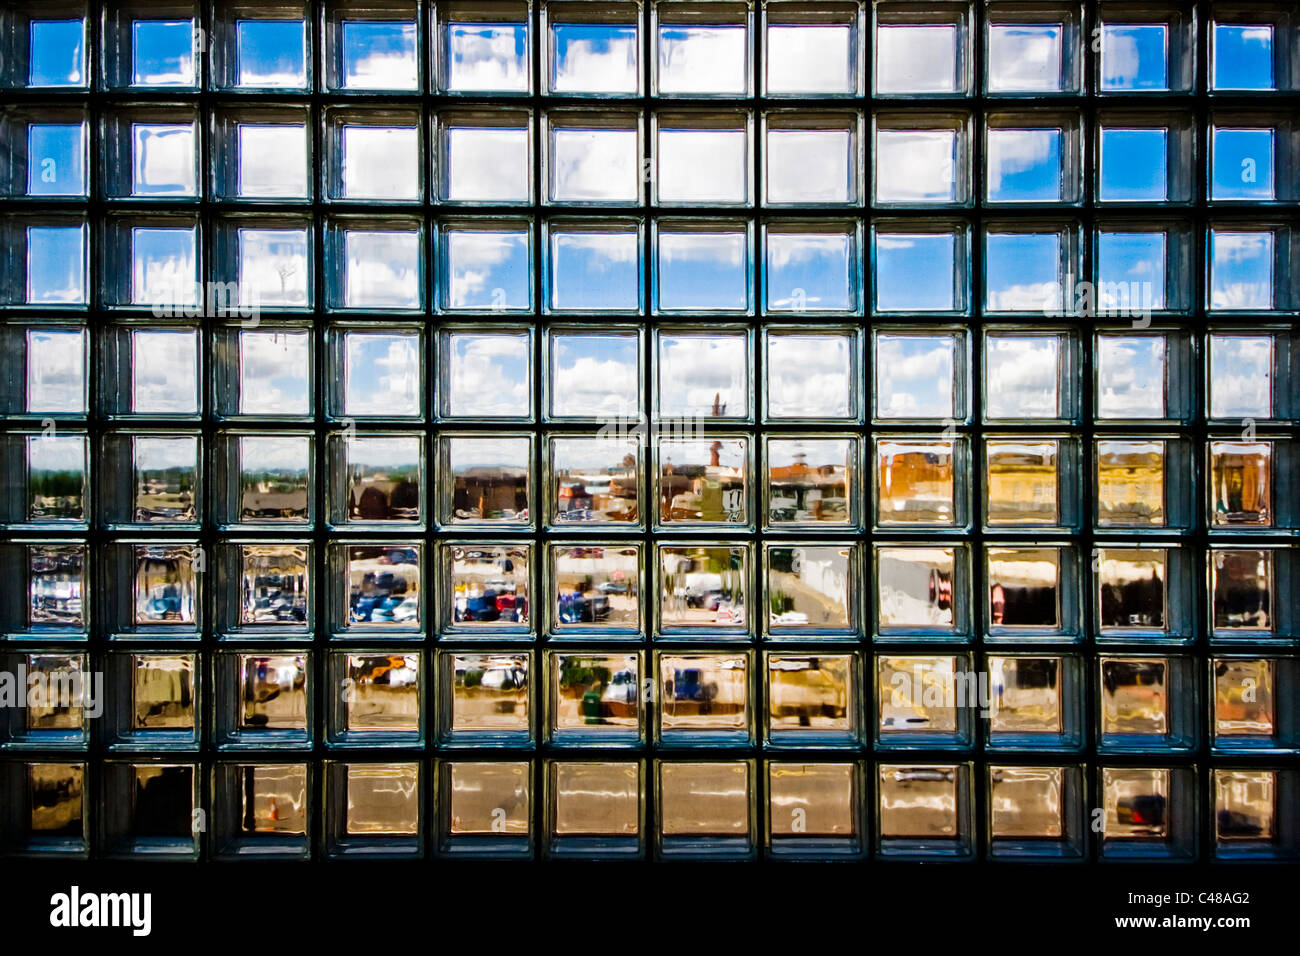 The Strangeways area of Manchester is seen through tiled glass. Stock Photo